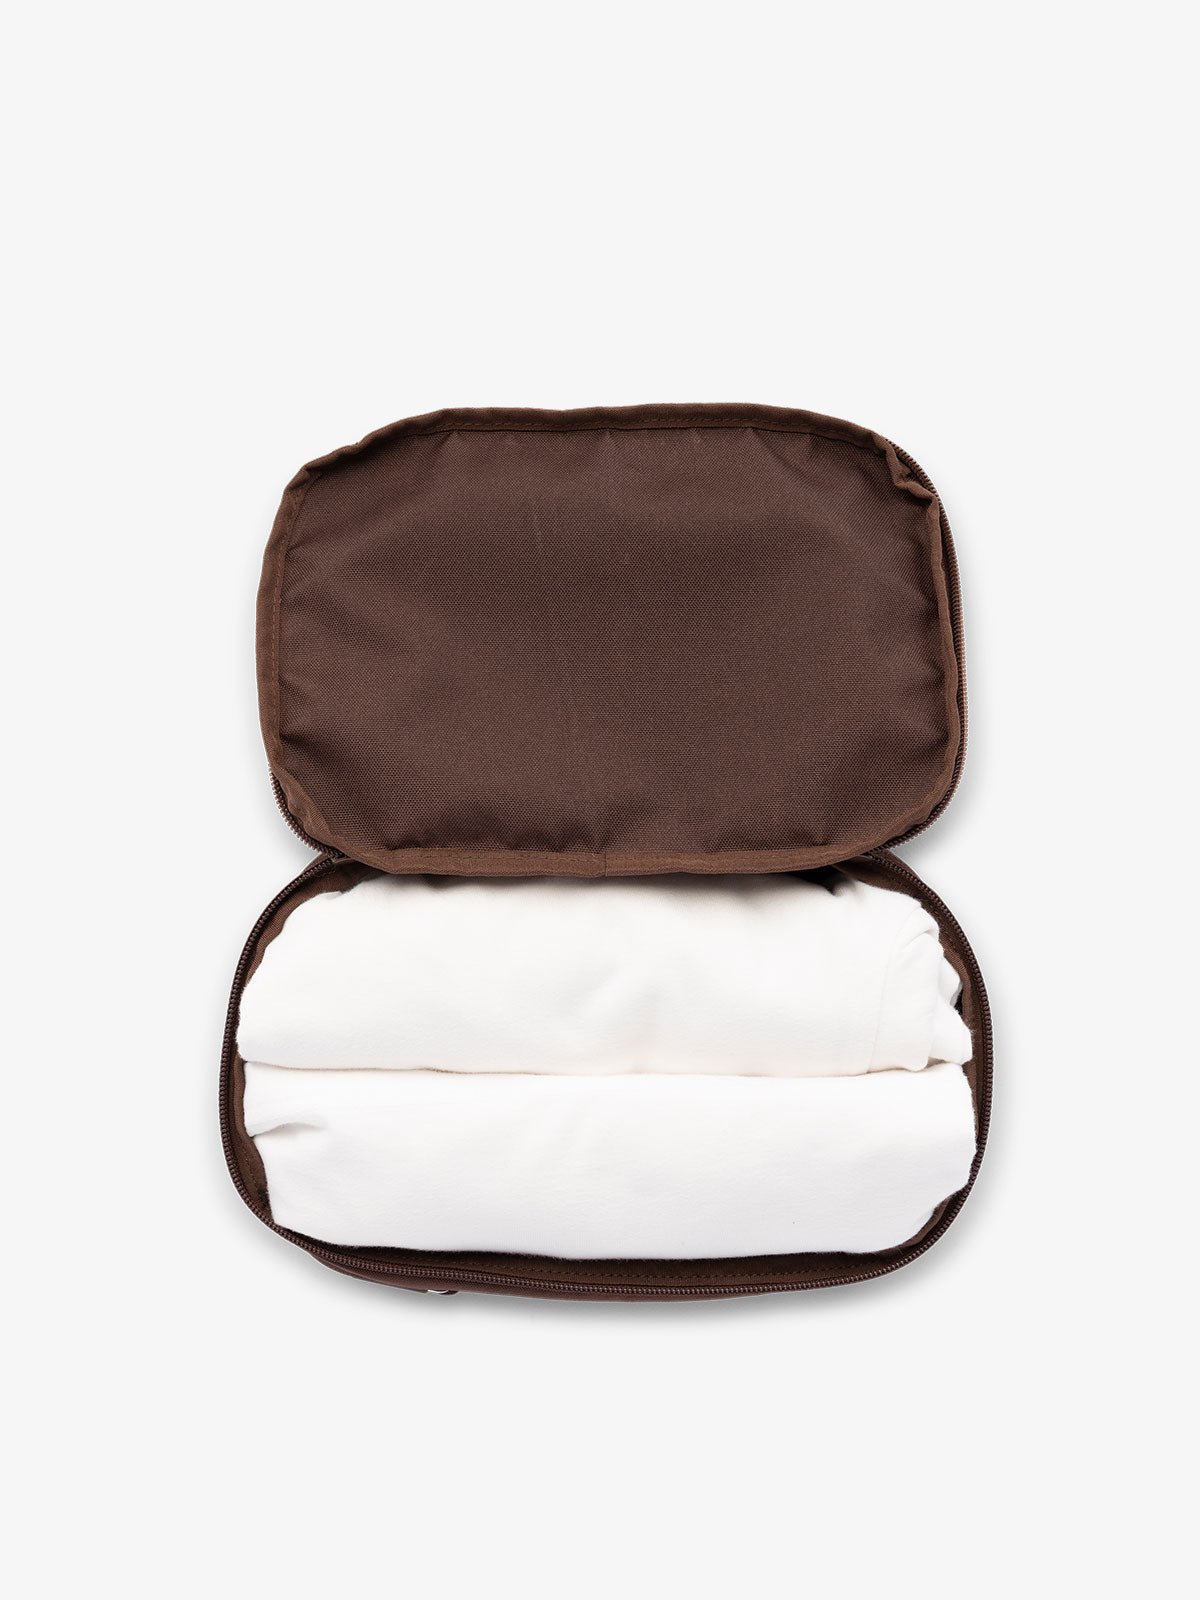 CALPAK small packing cubes for travel made with durable material in walnut brown